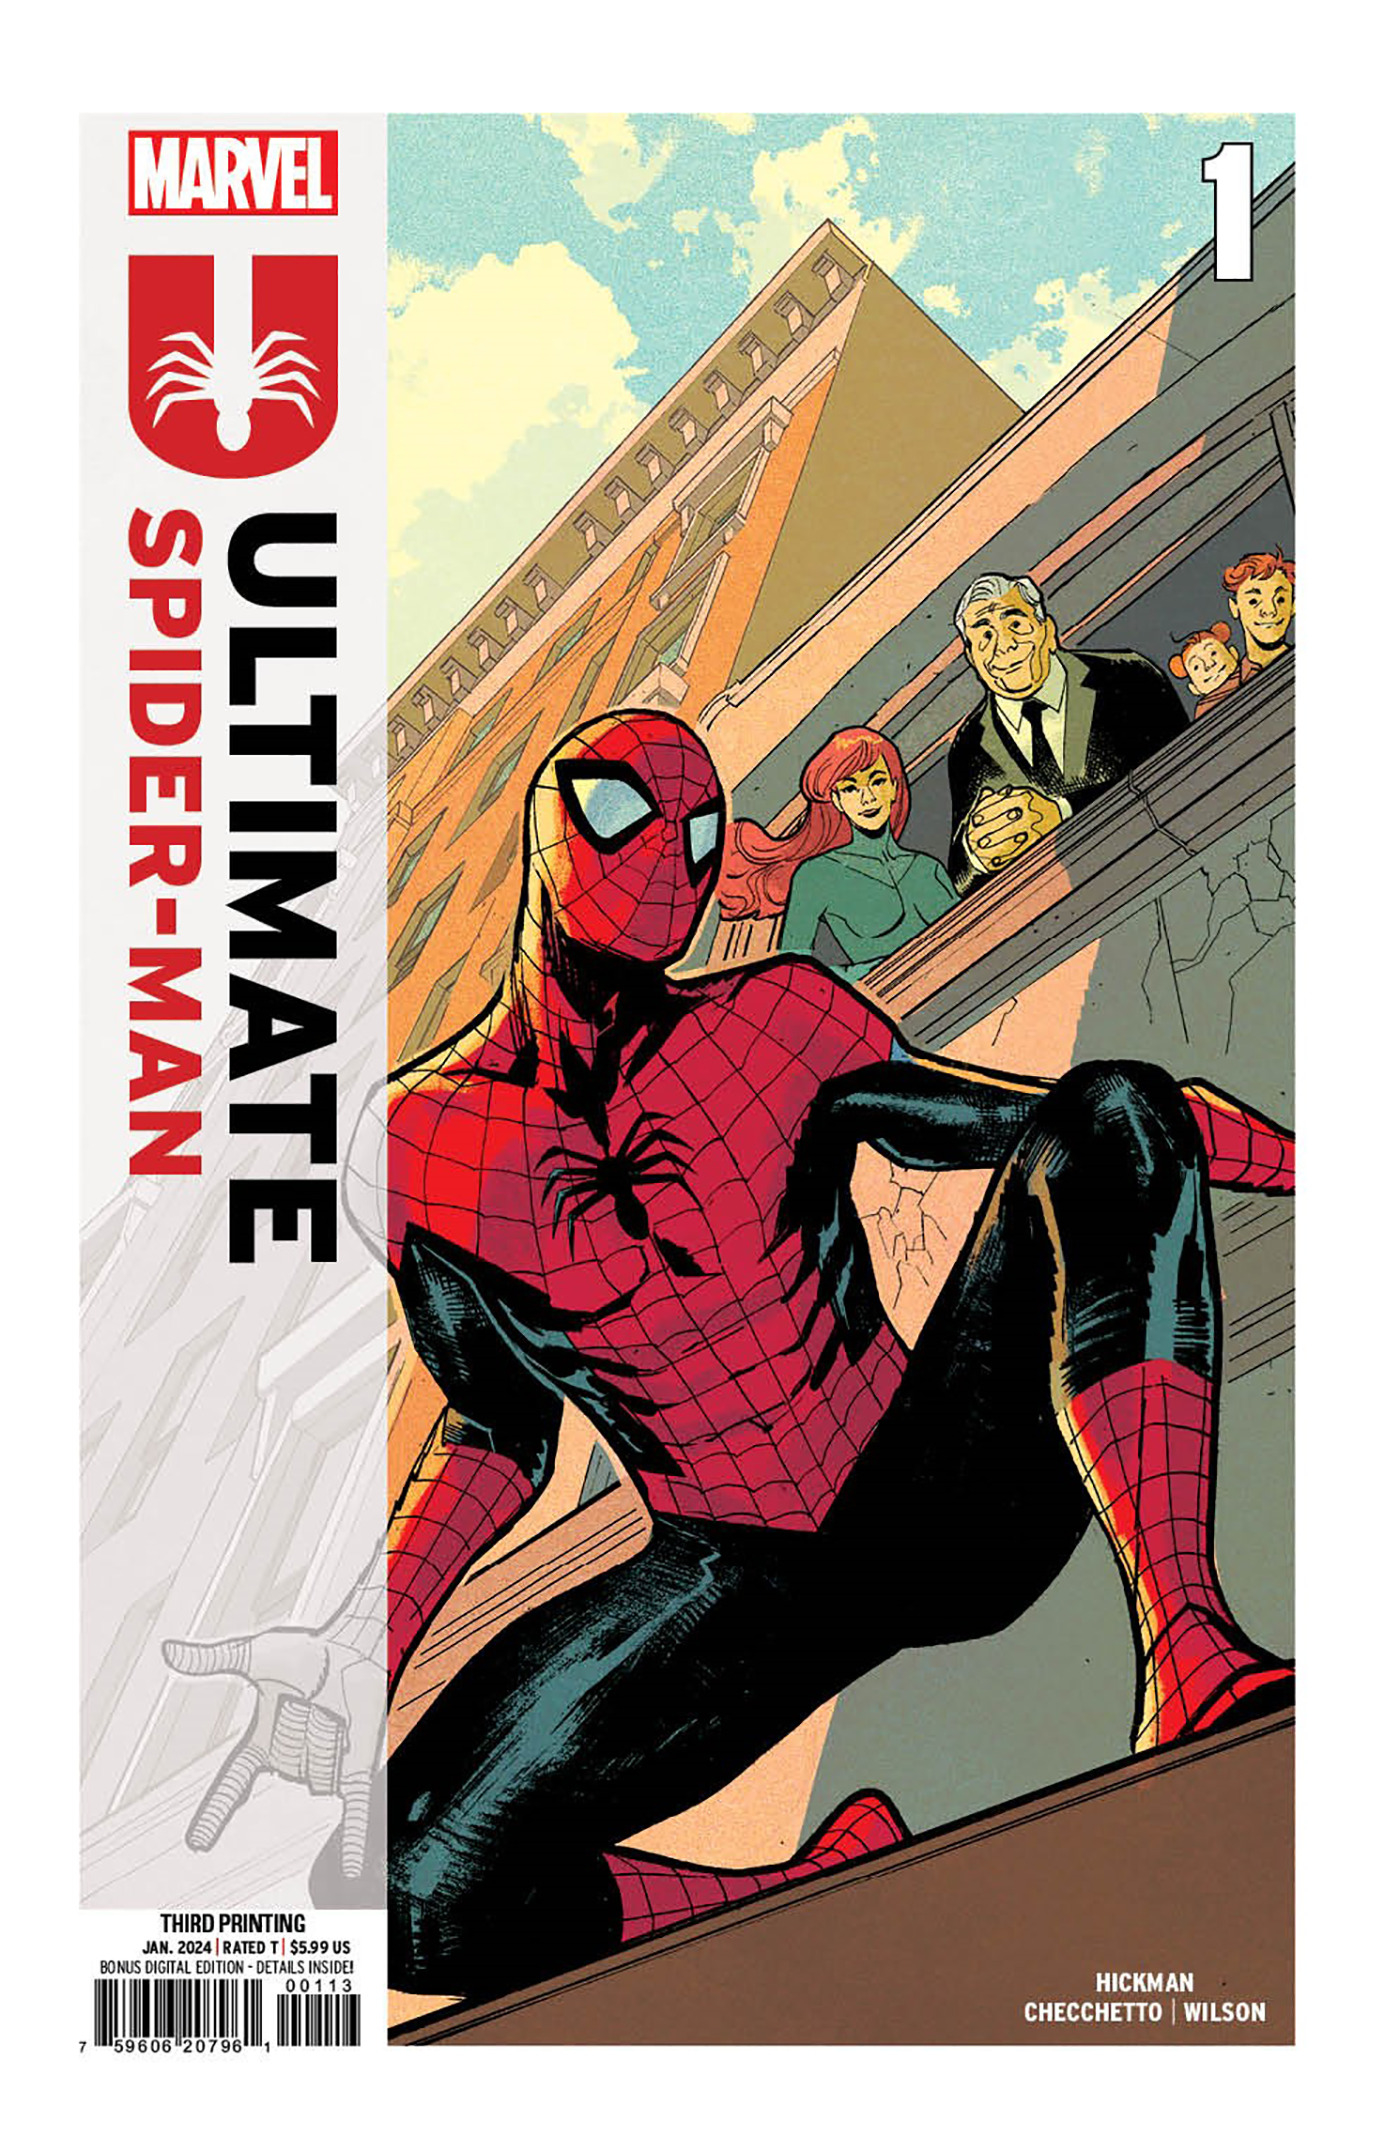 Ultimate Spider-Man #1 3rd Print